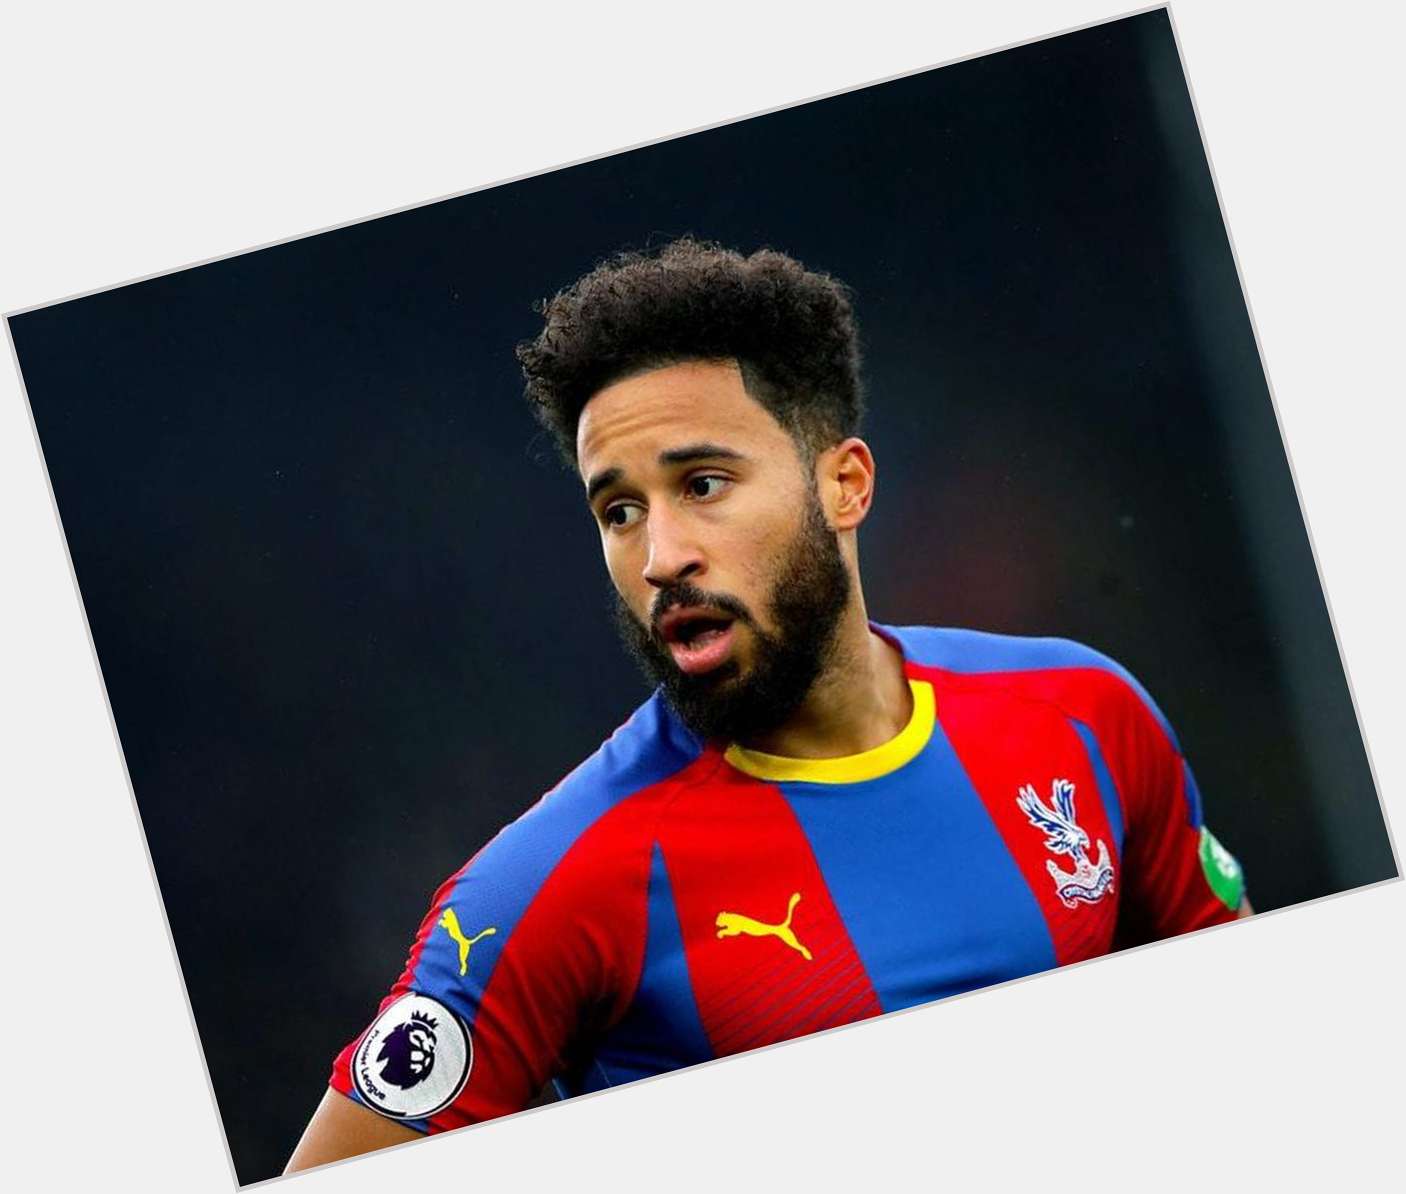 Https://fanpagepress.net/m/A/Andros Townsend New Pic 1